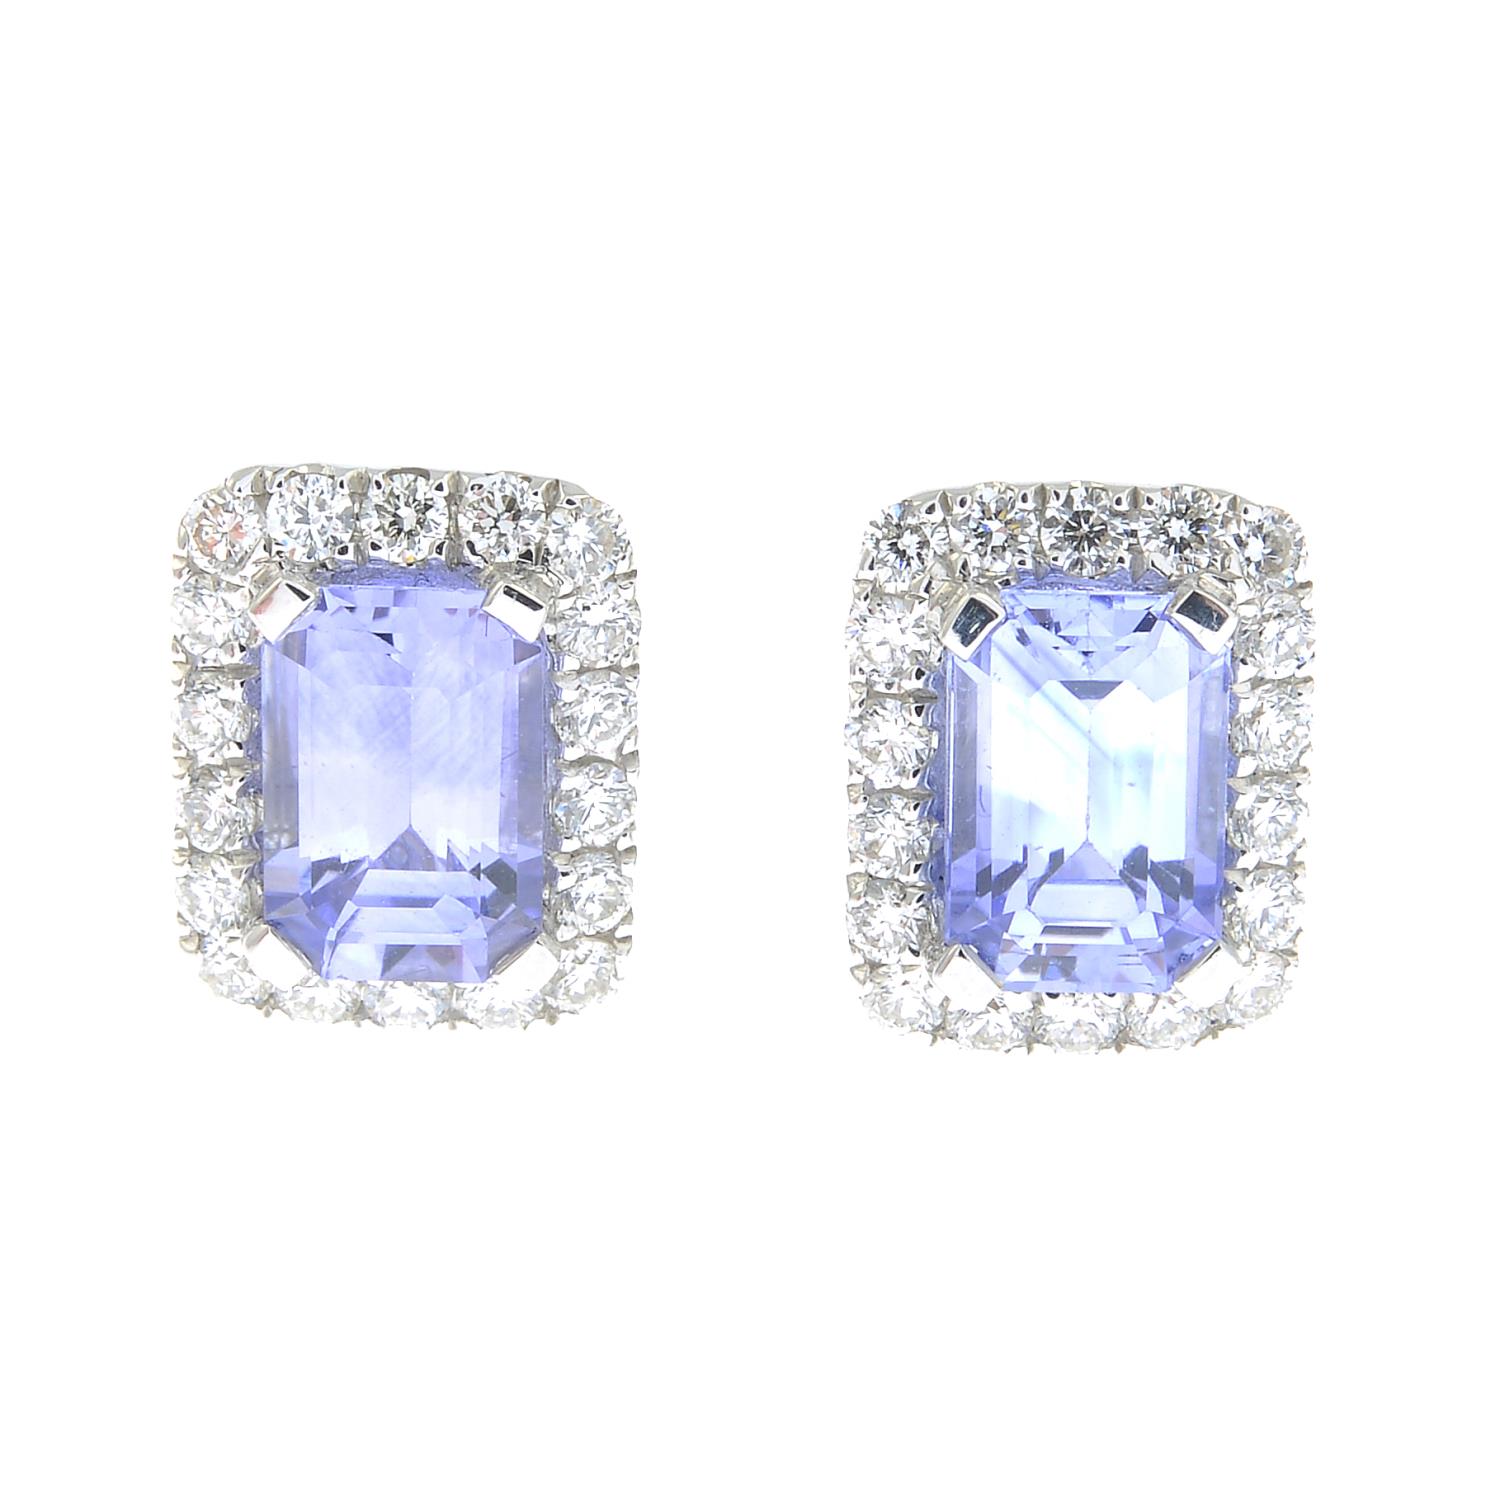 A pair of diamond and sapphire earrings.Total sapphire weight 1.39cts,